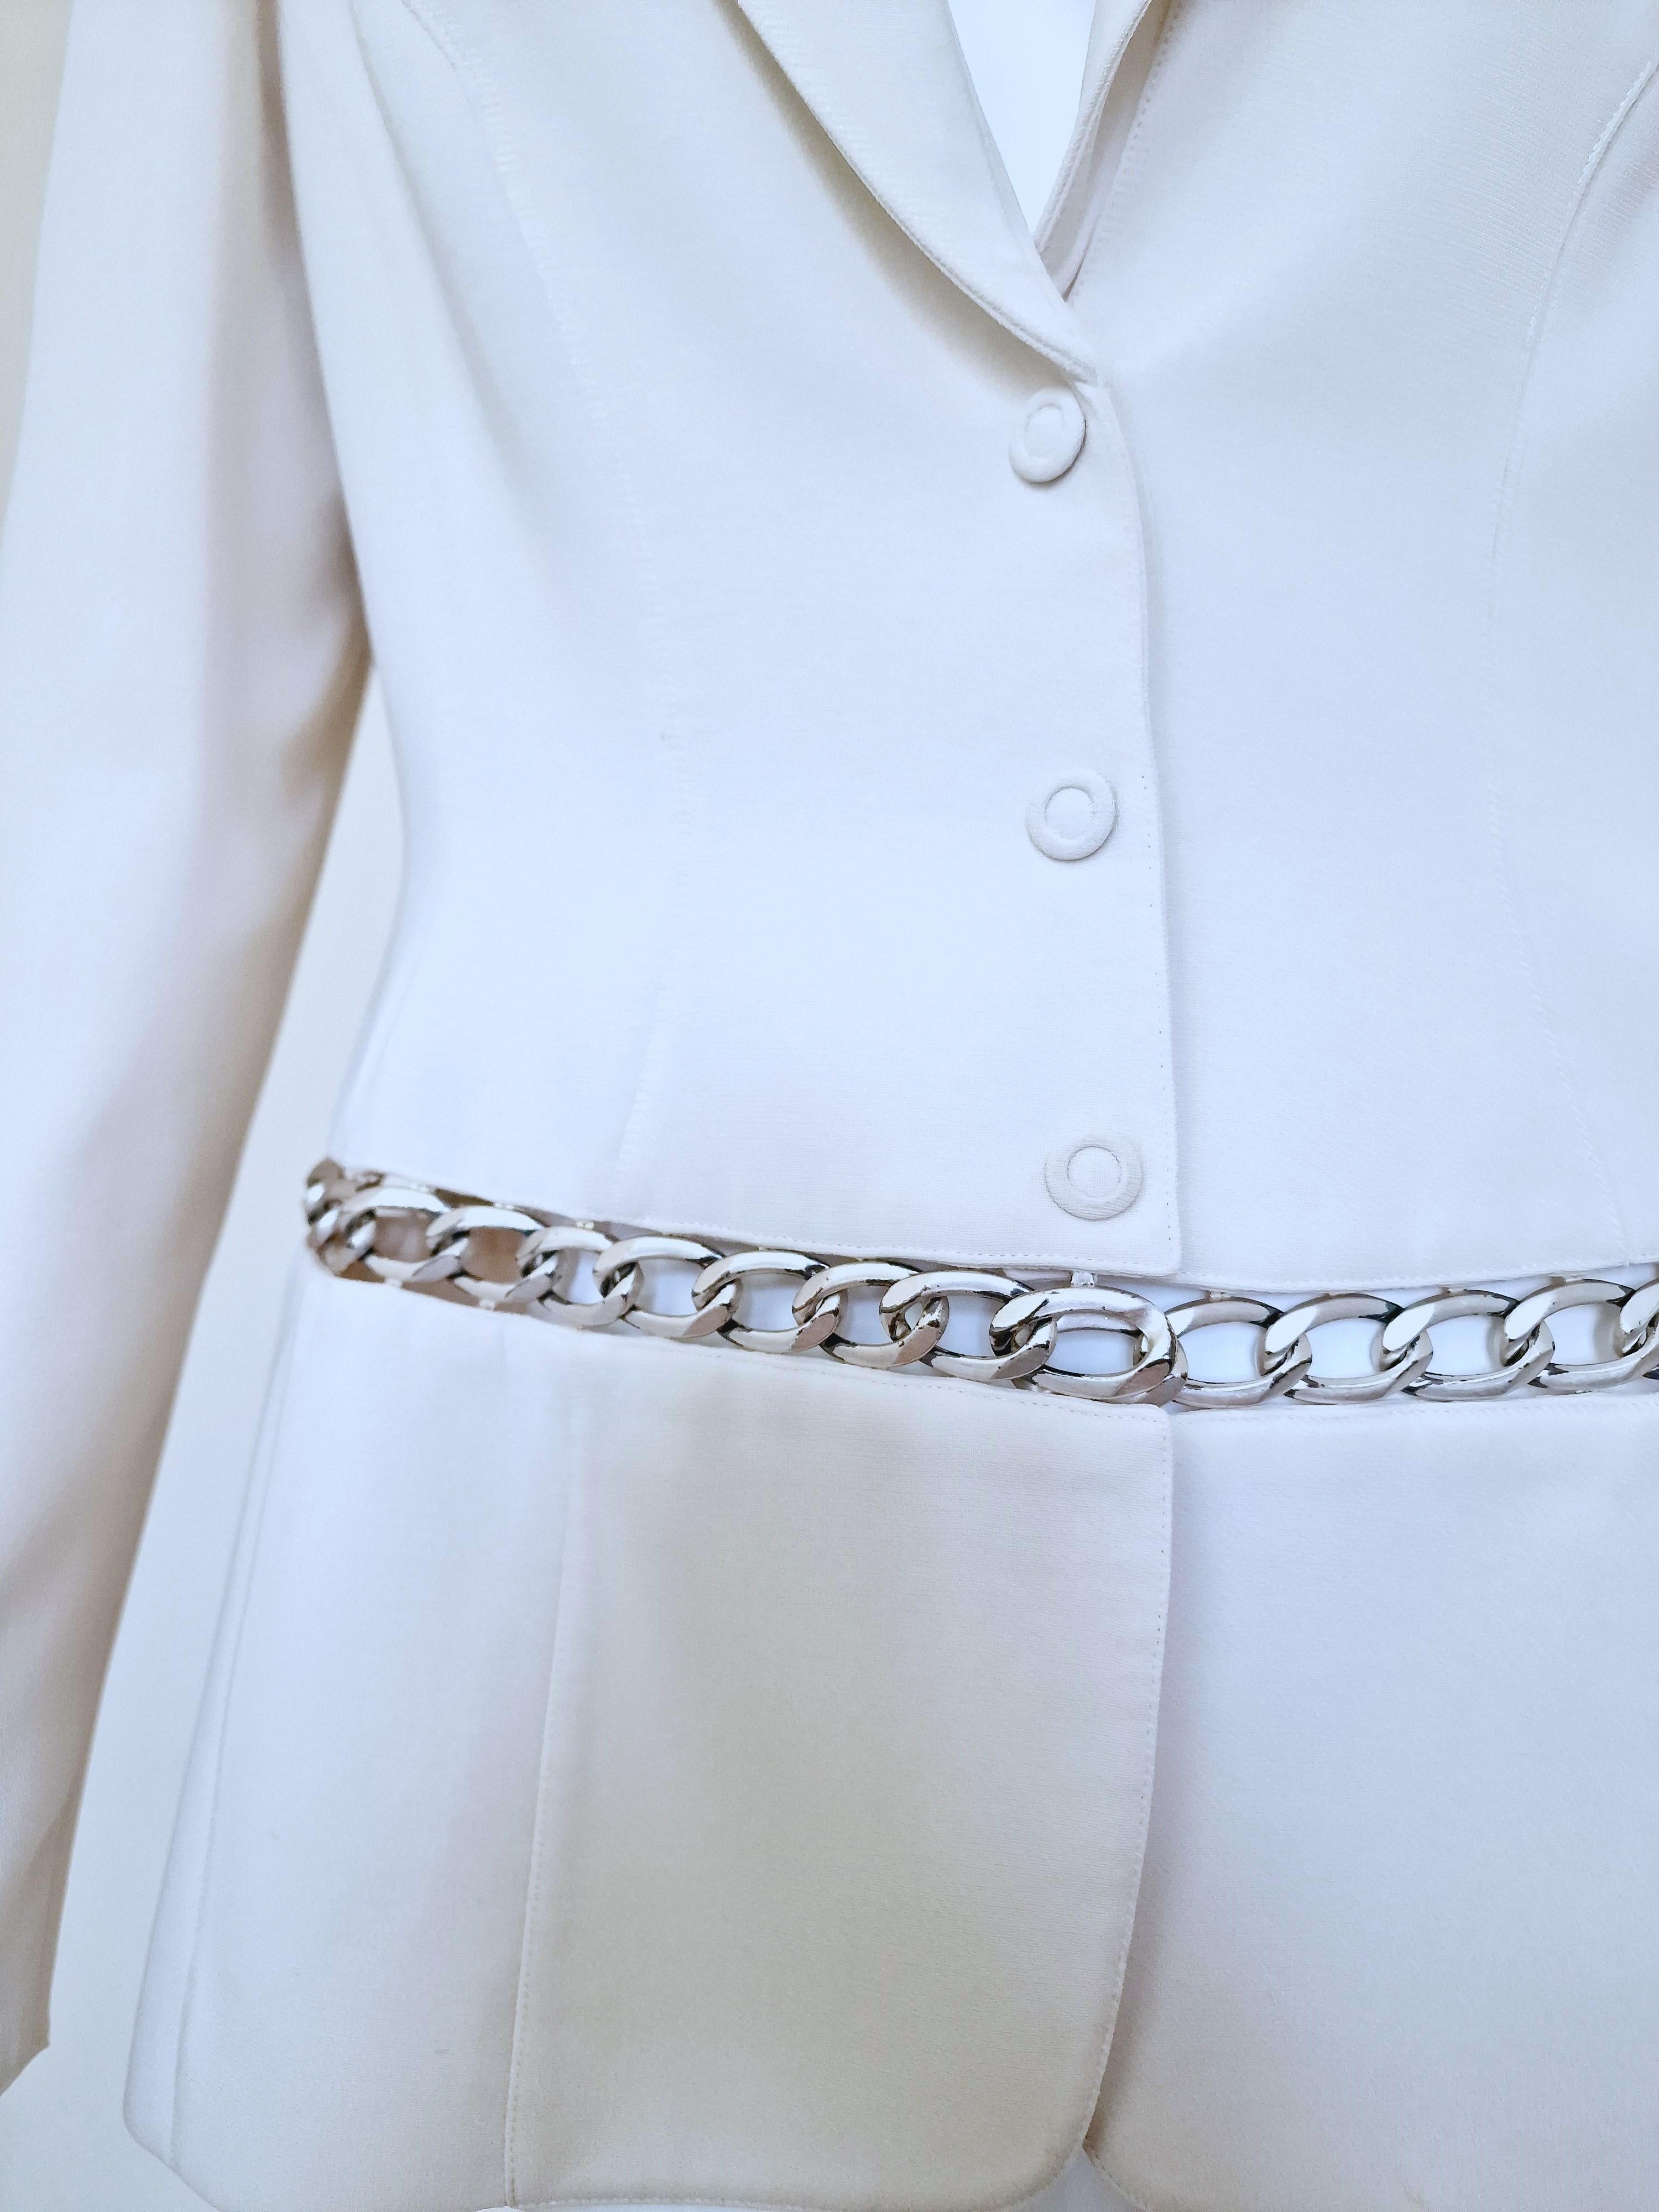 Thierry Mugler Chain Runway Evening Couture White Wasp Waist Large Blazer Jacket For Sale 1